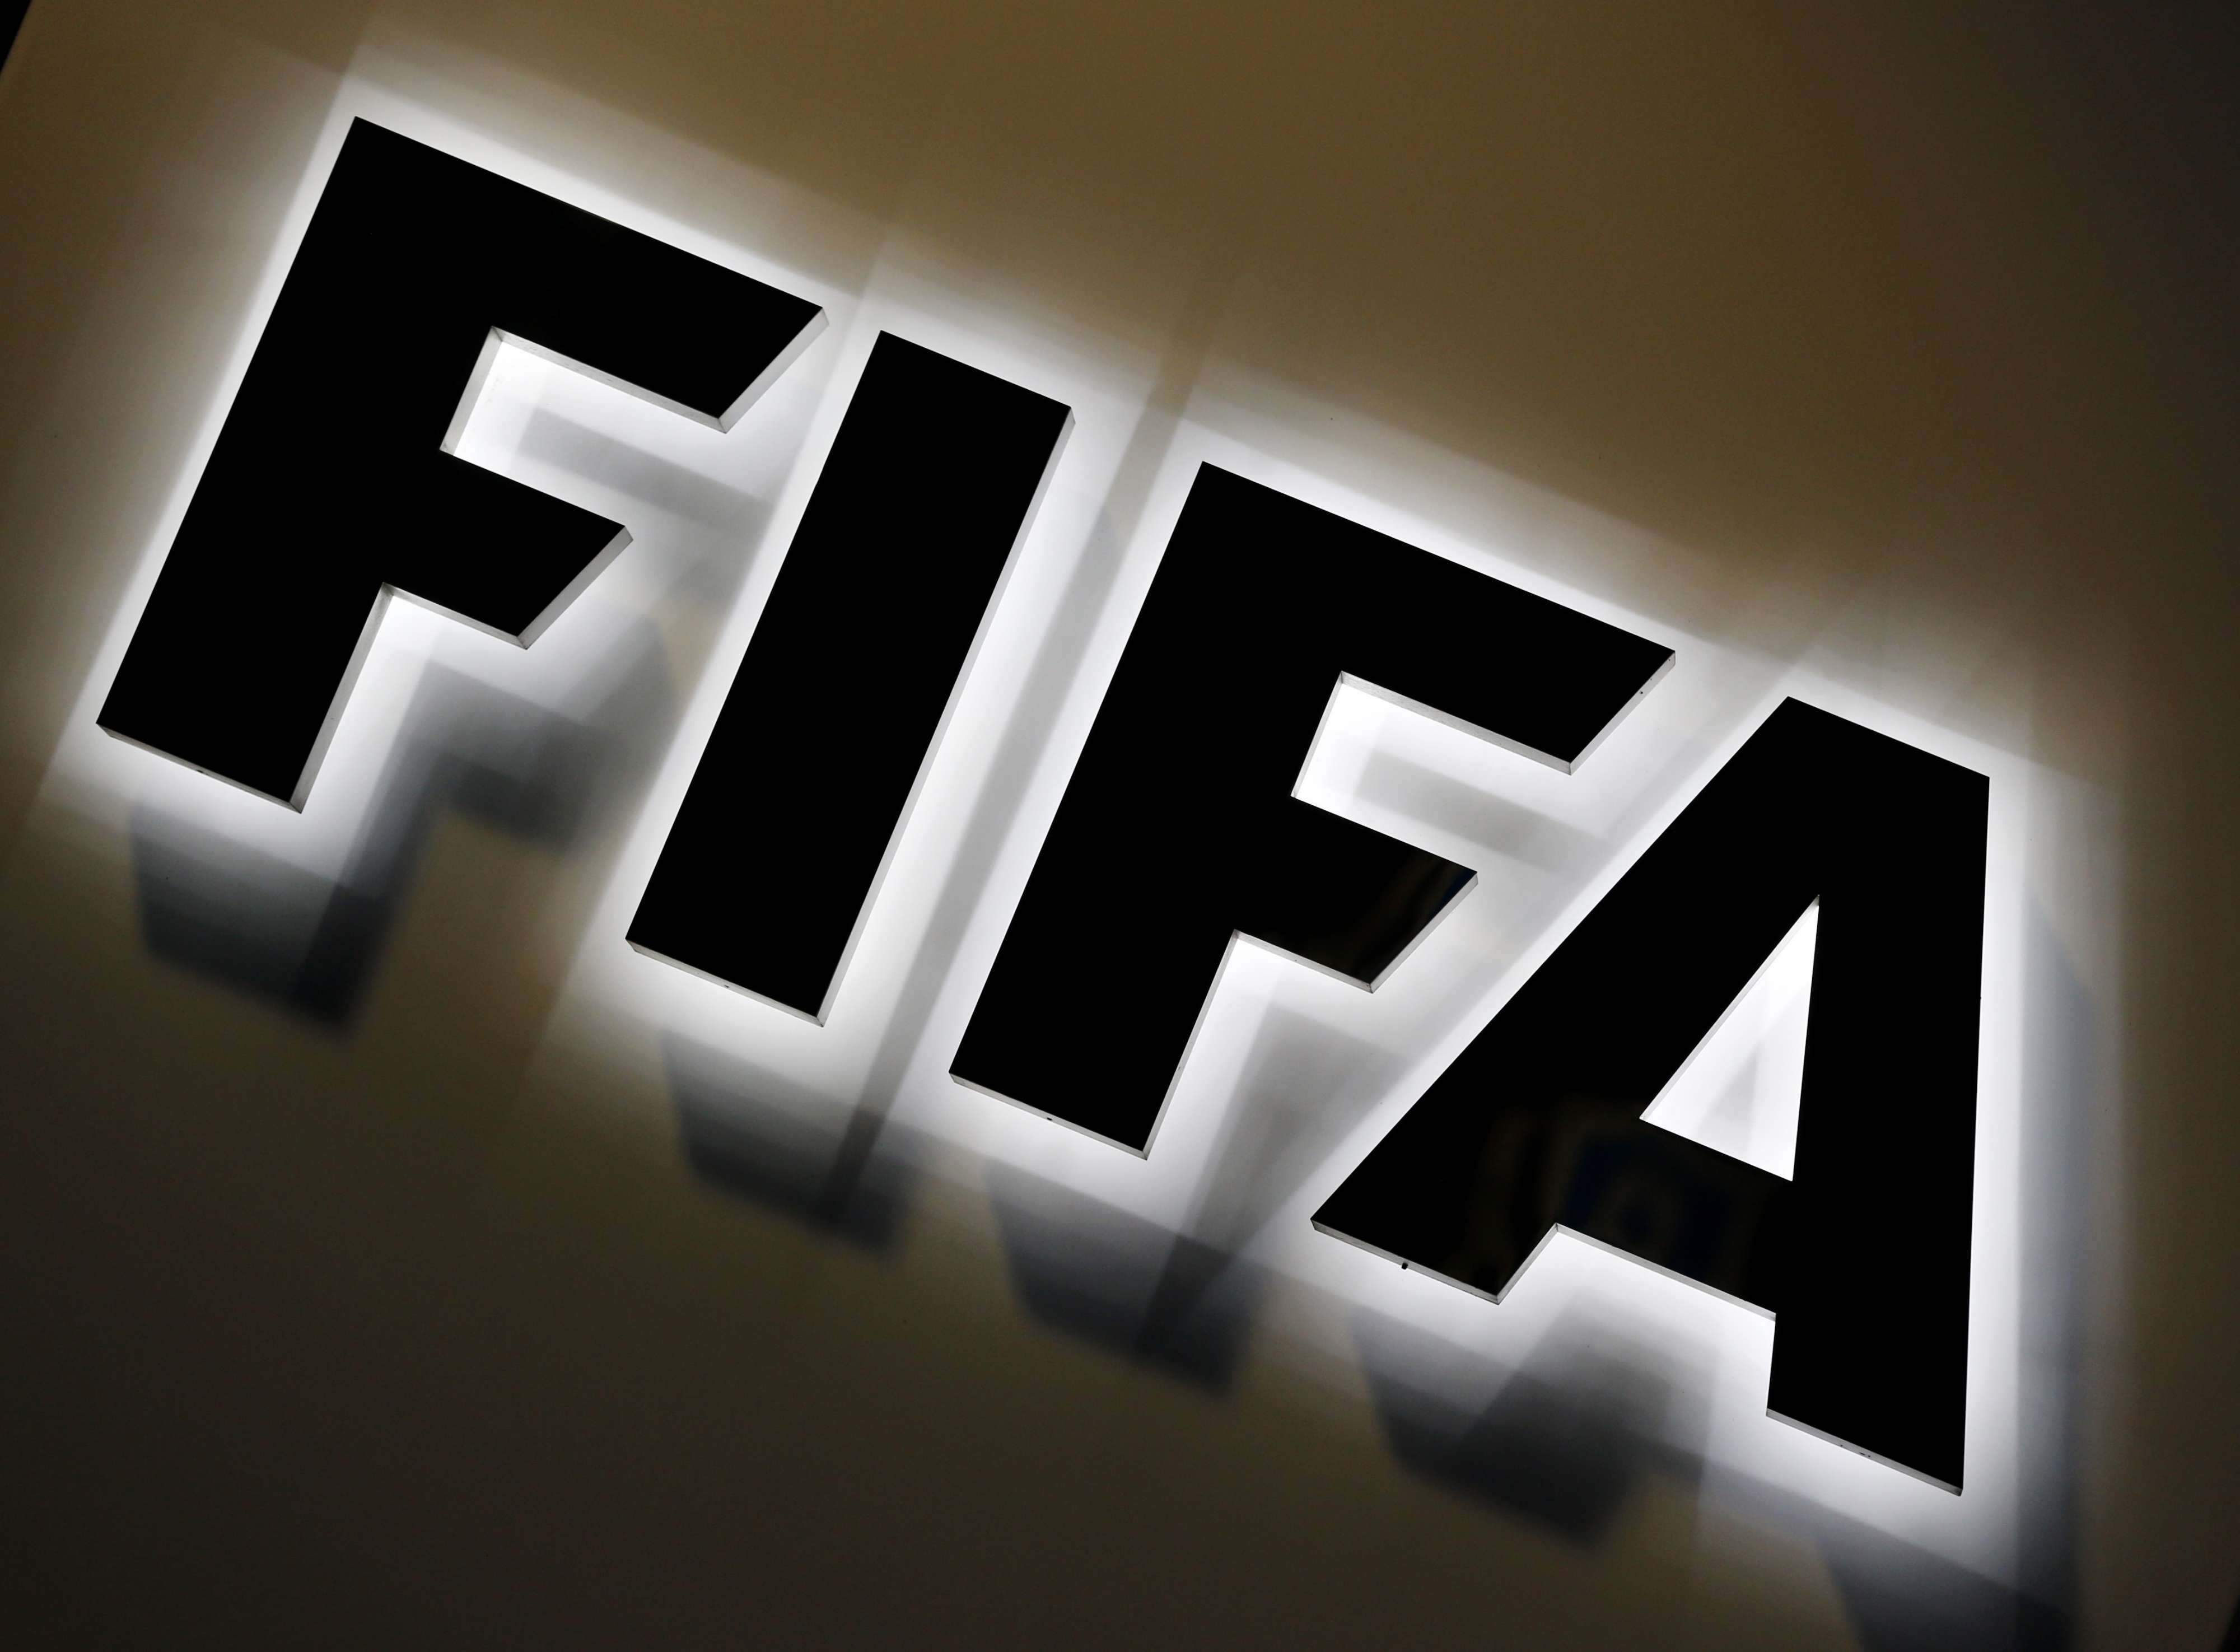 Qatar's participation in the culture of graft at FIFA is now widely known